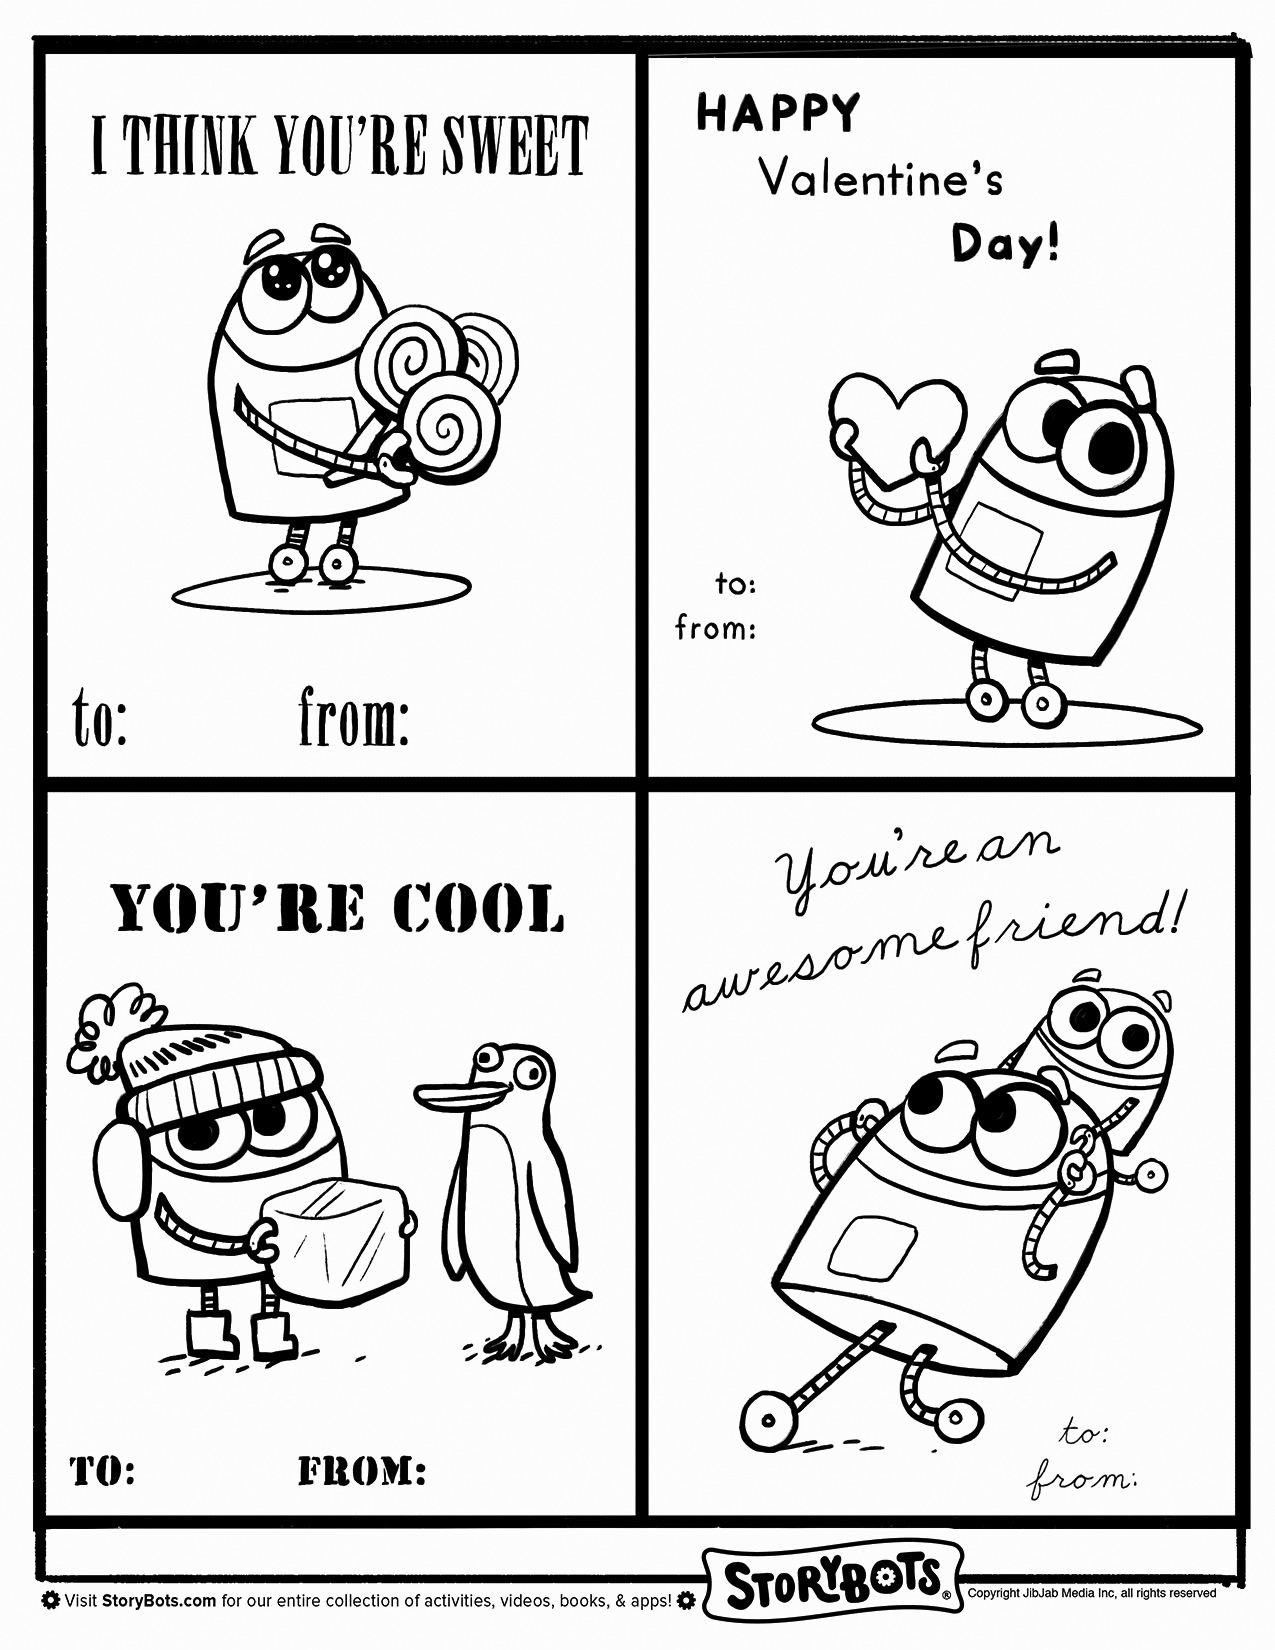 Happy Valentine Storybots Coloring Page